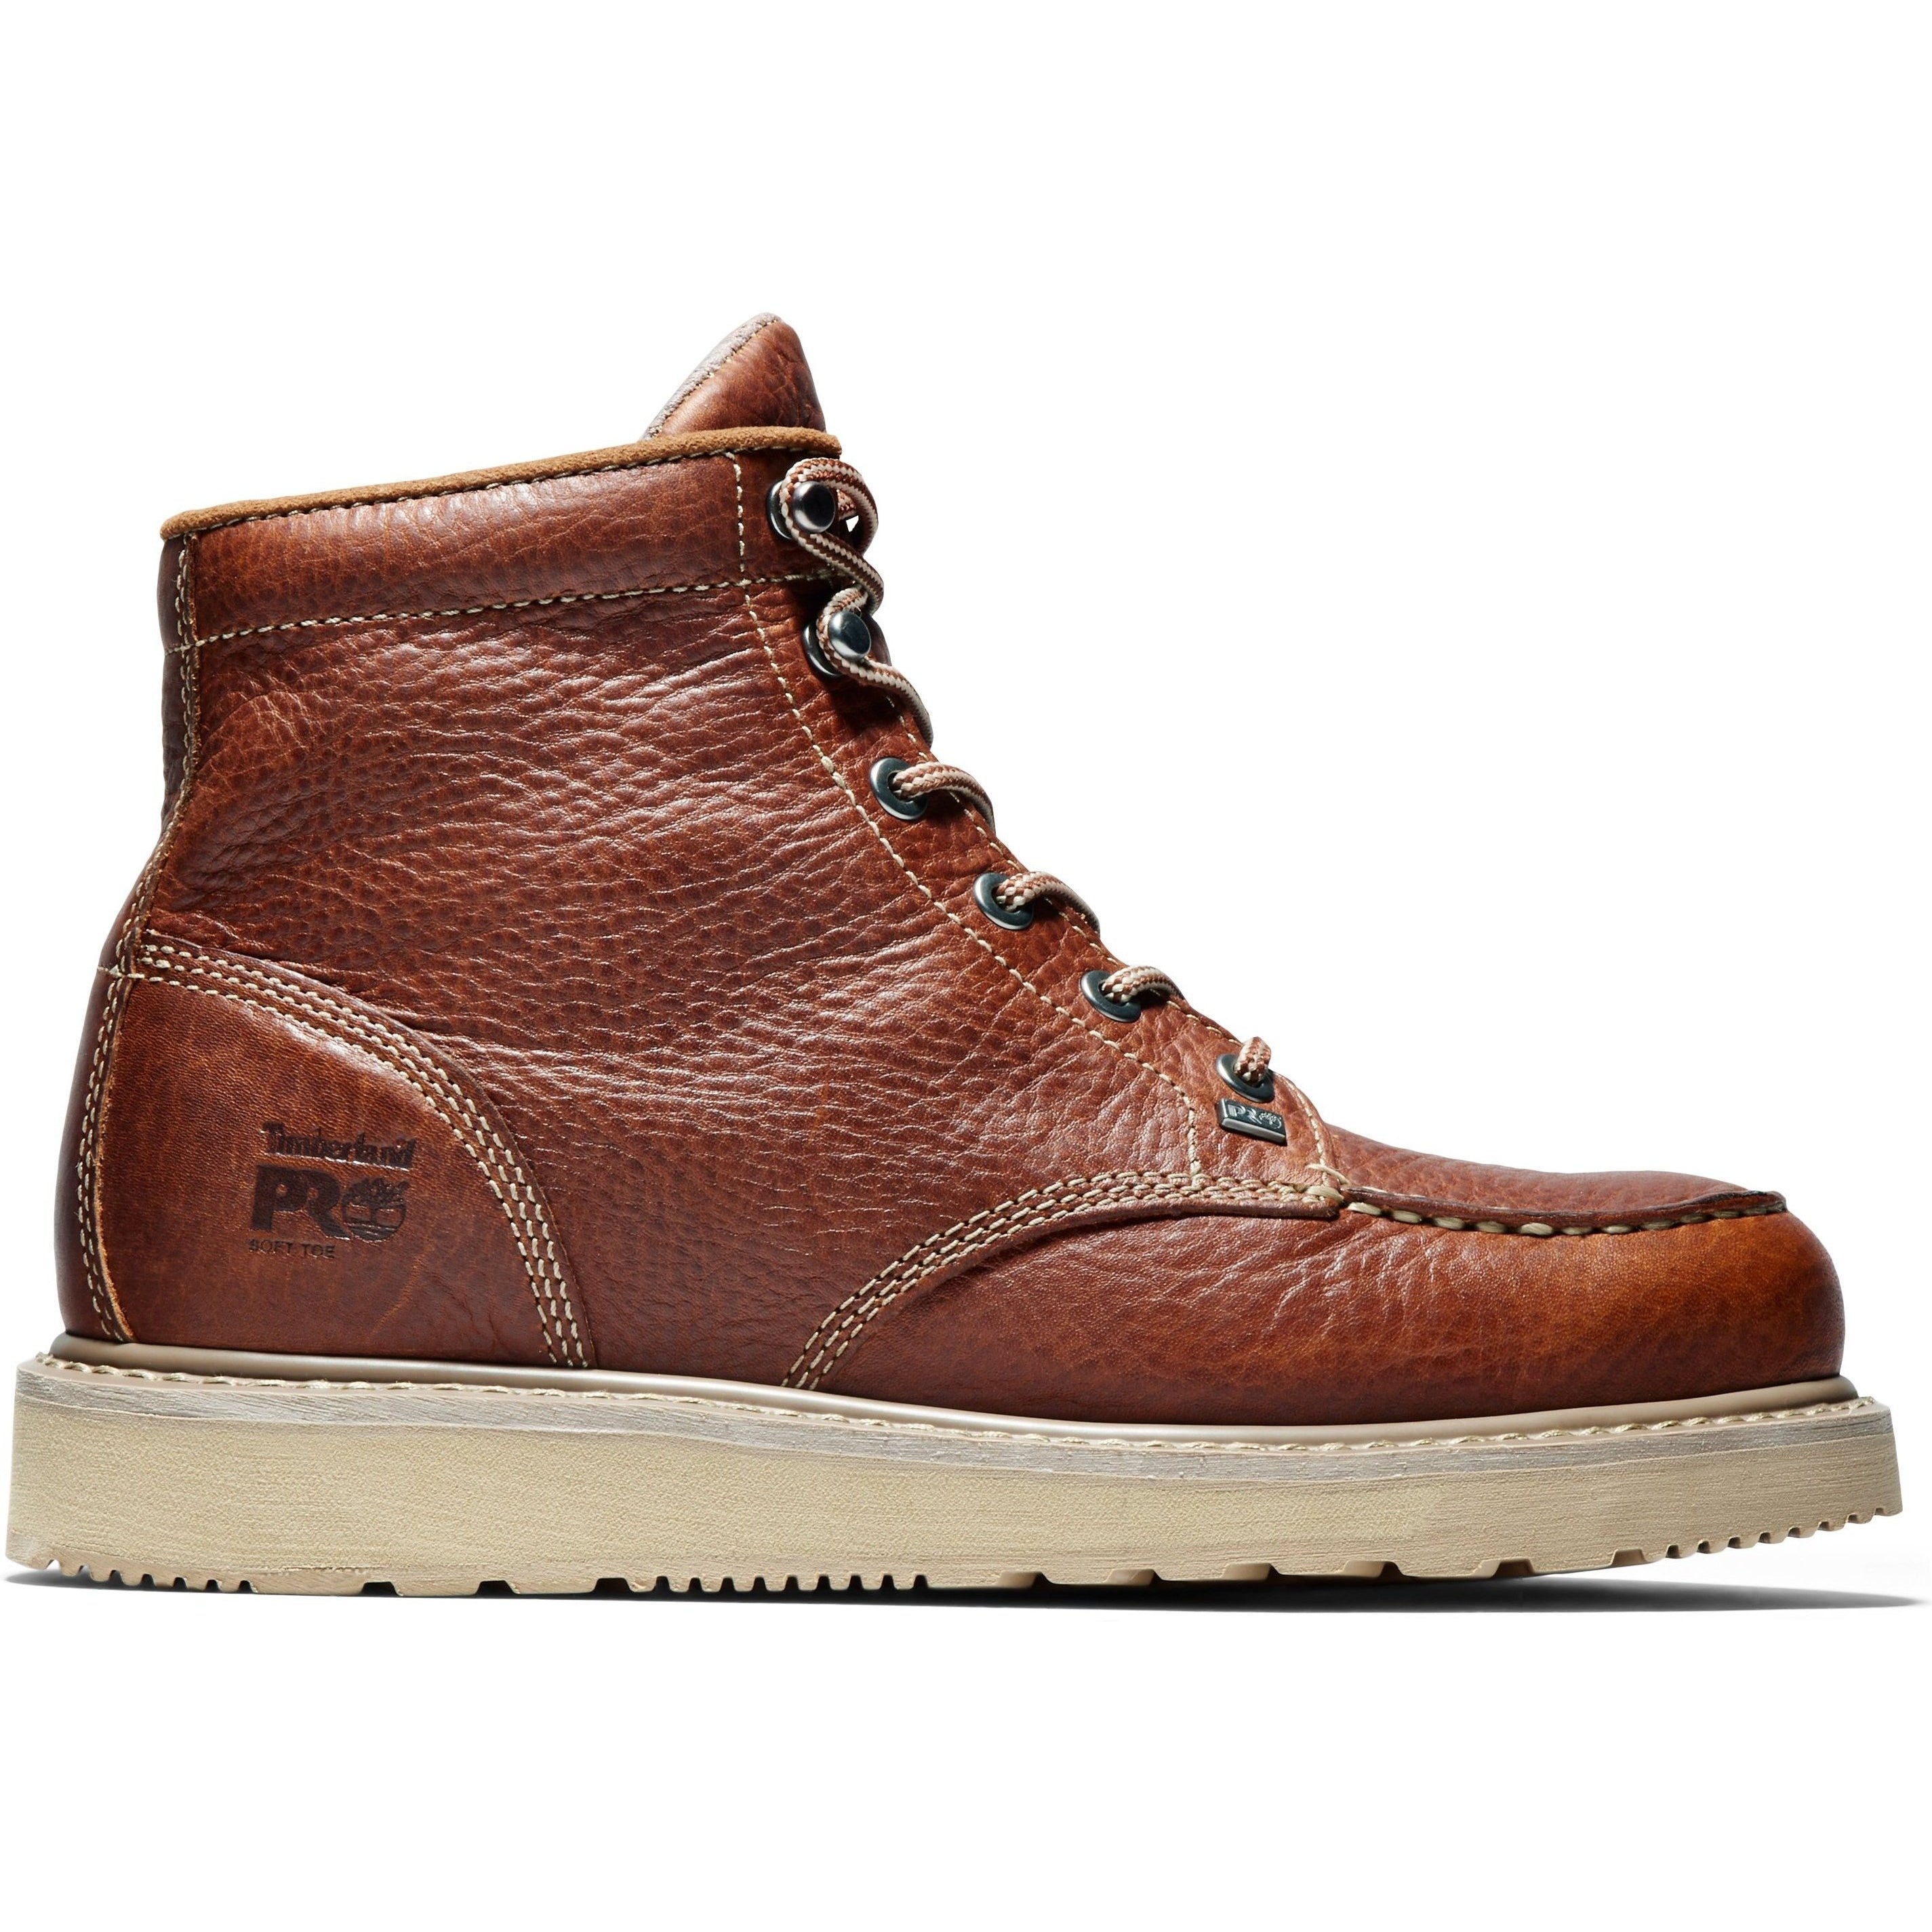 Timberland PRO Men's Barstow Wedge 6" Soft Toe Work Boot - TB089647214  - Overlook Boots